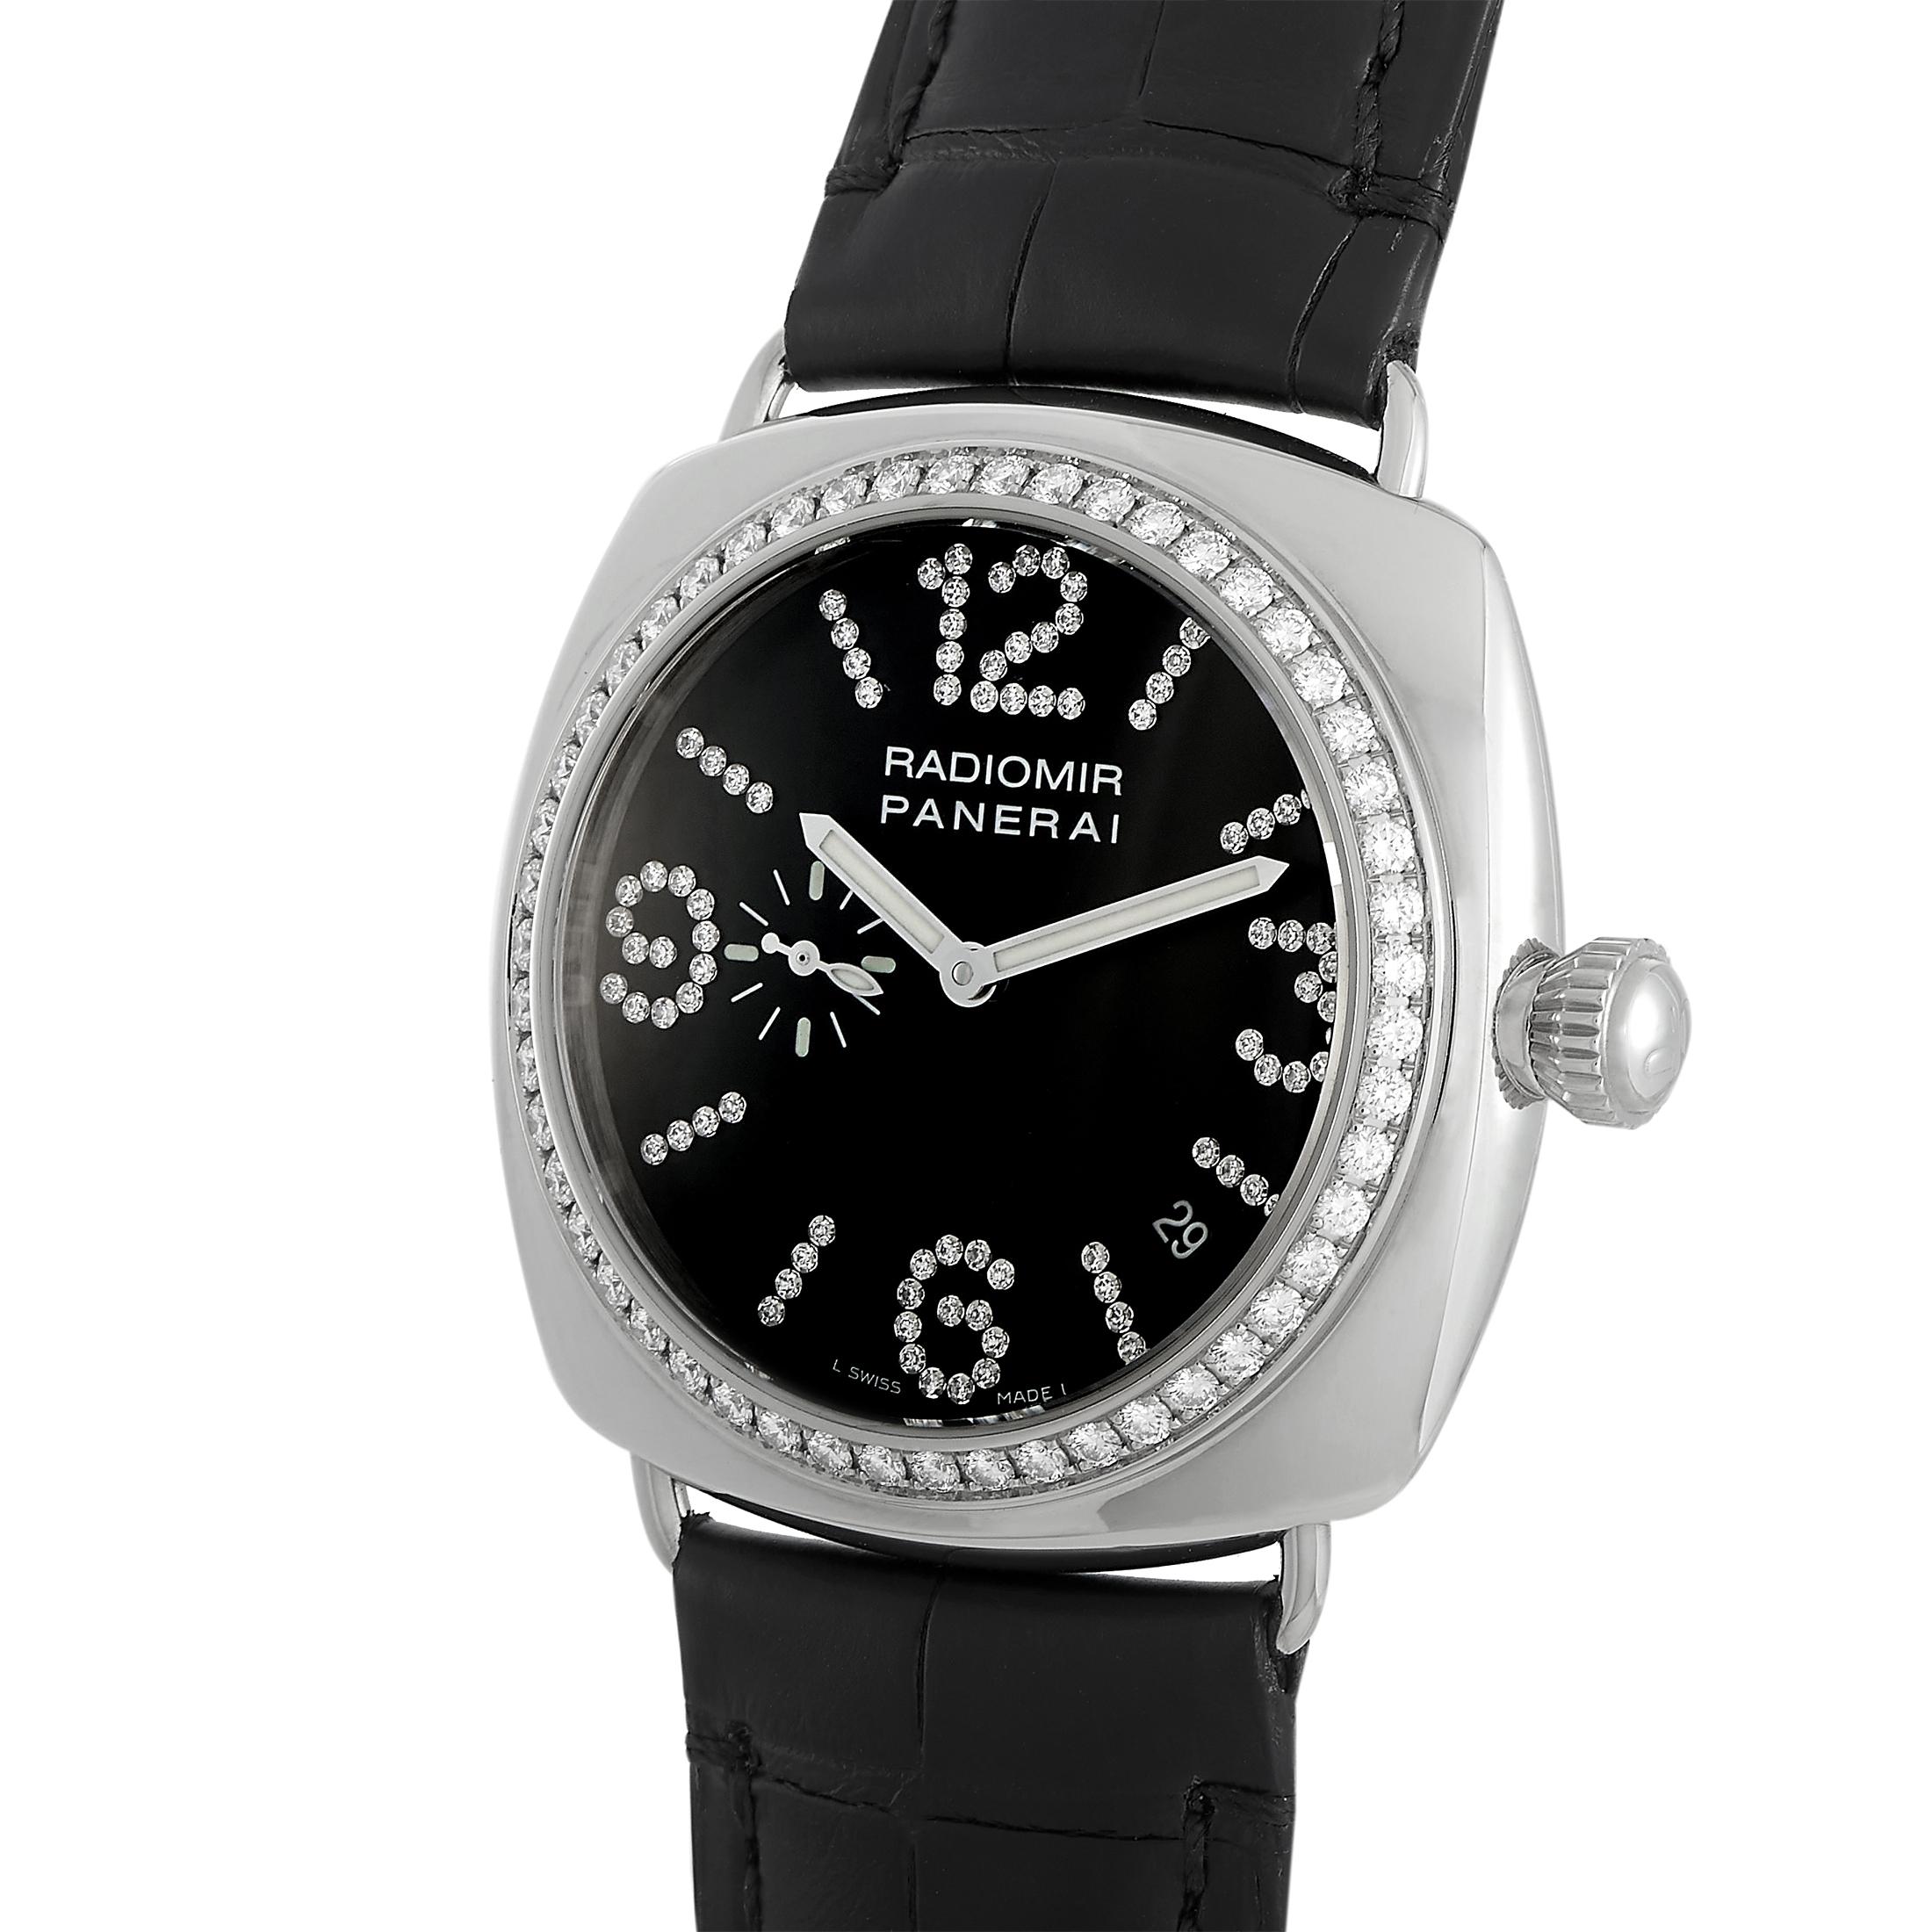 The Officine Panerai Radiomir watch, reference number PAM00134, is presented with a 40 mm 18K white gold case that boasts see-through back and a diamond-set bezel. The case is water-resistant to 30 meters and mounted onto a black leather strap,